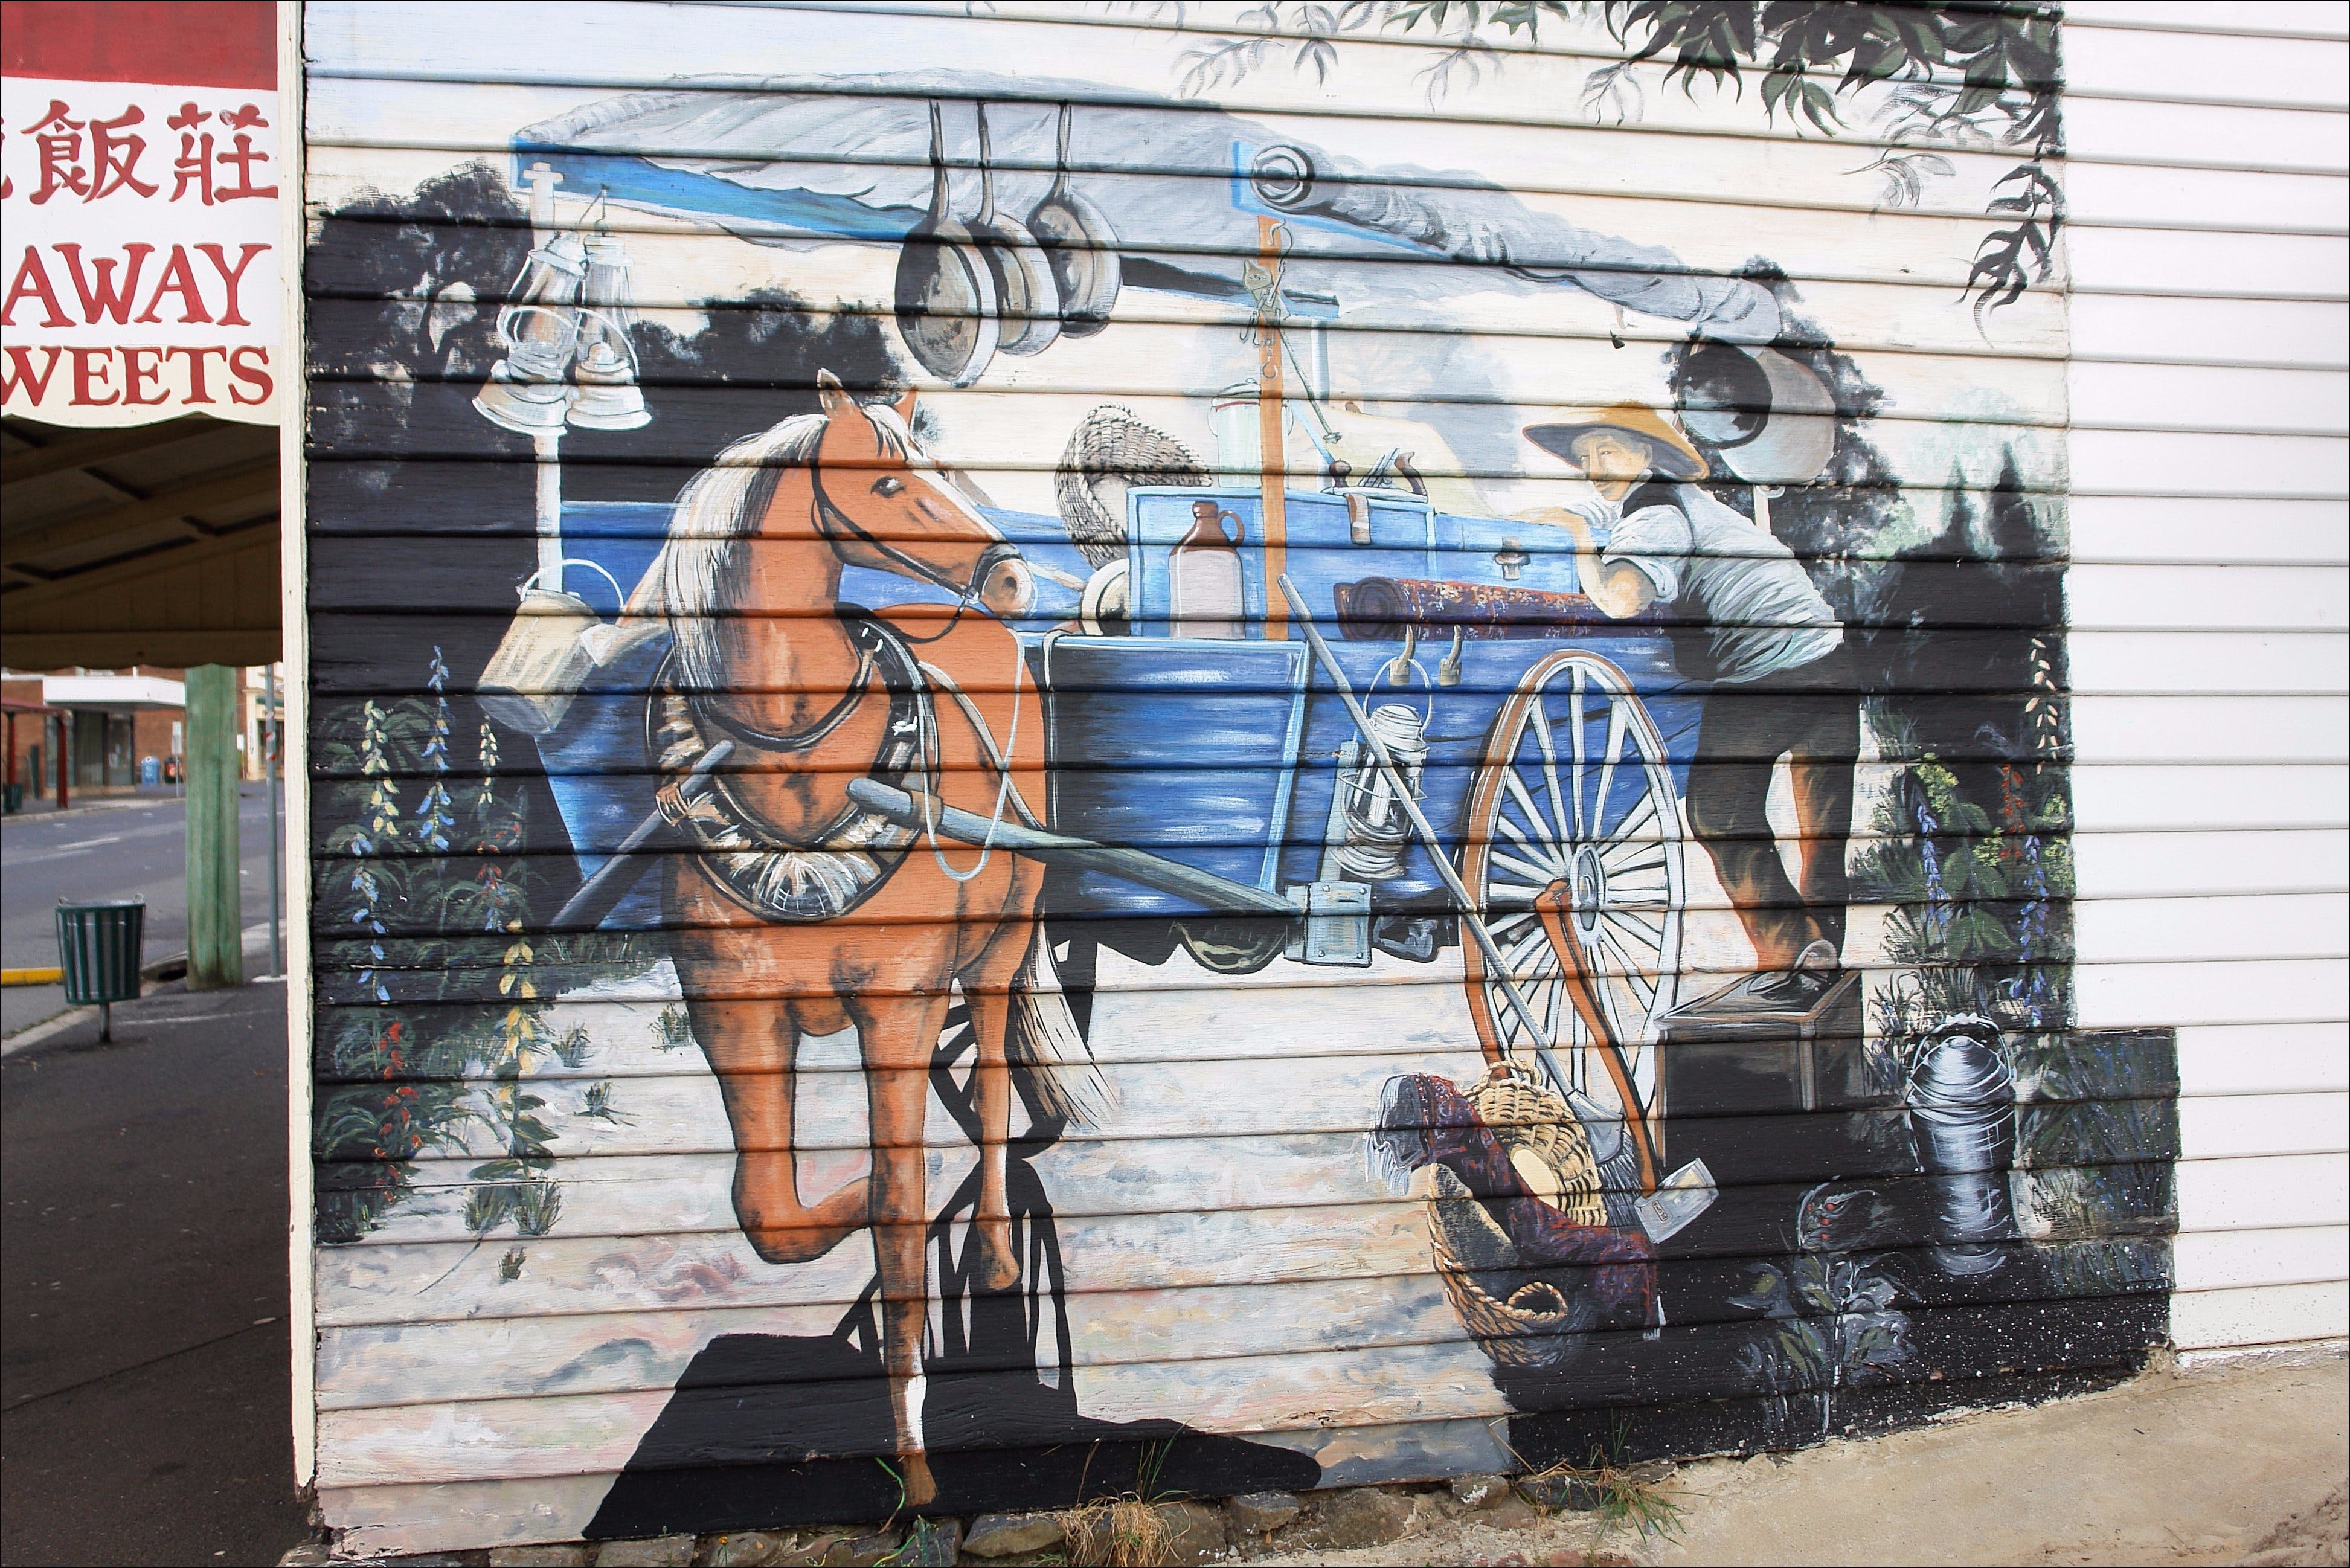 Sheffield Town of Murals - Broome Tourism